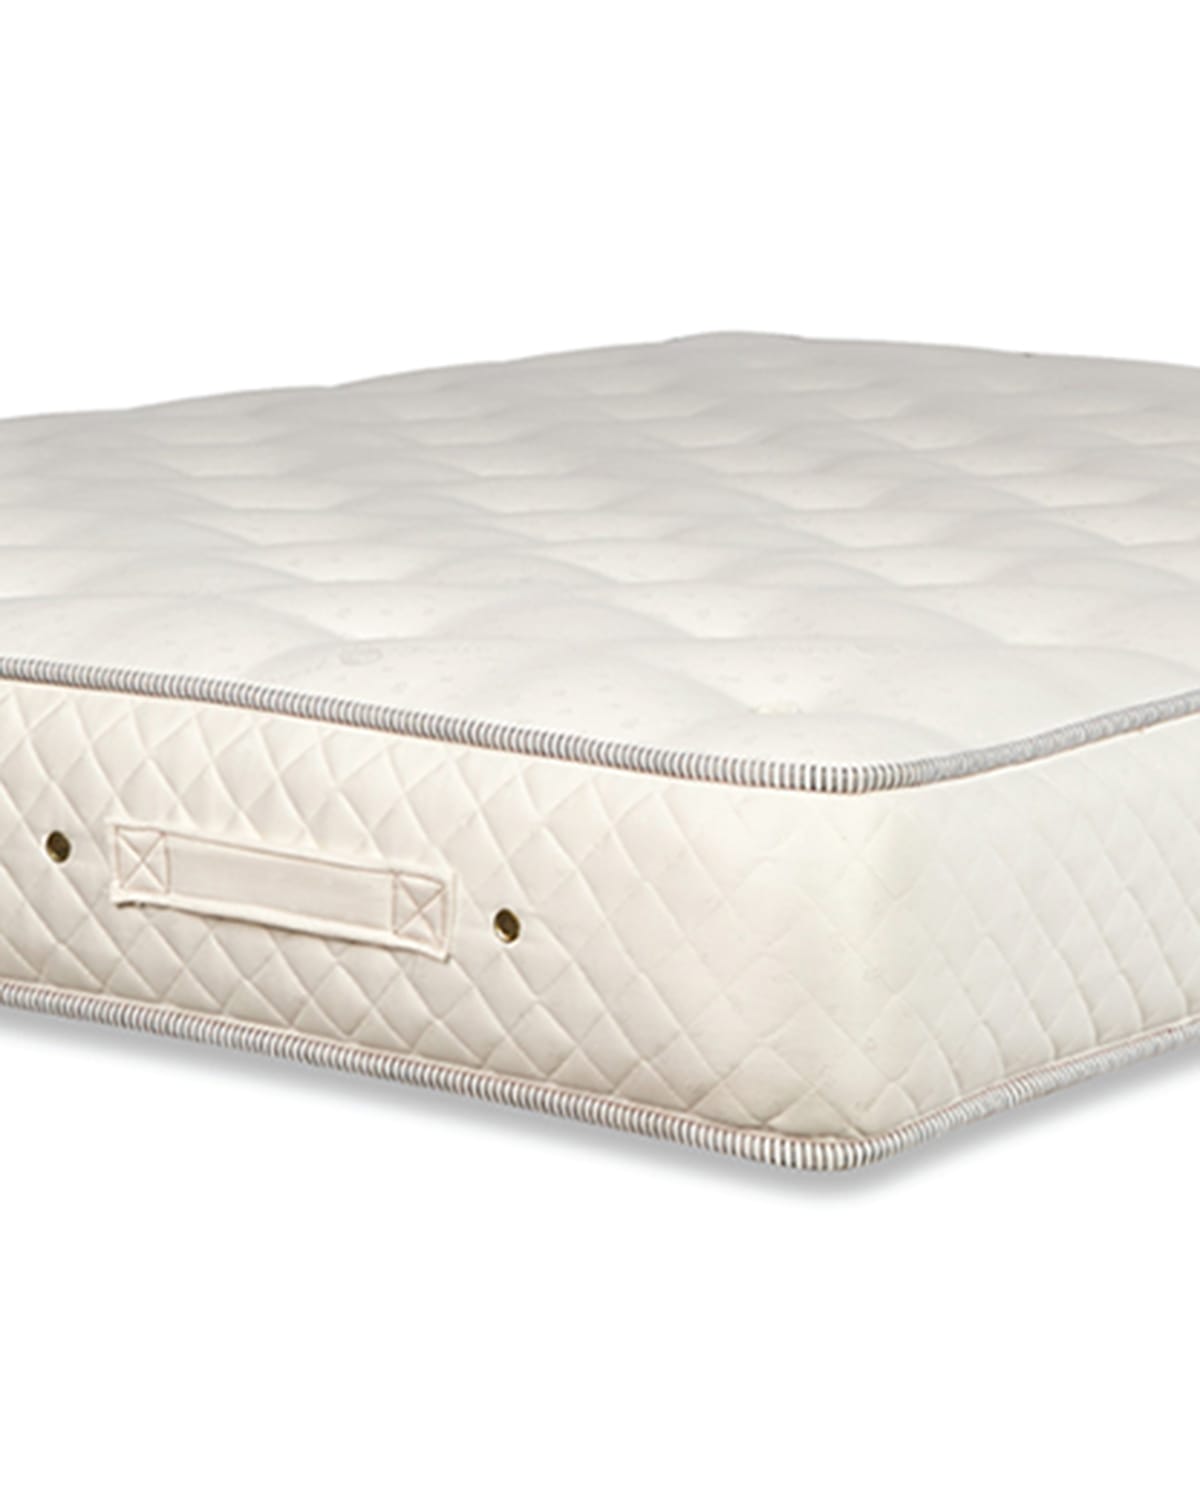 Royal-pedic Dream Spring Limited Firm California King Mattress In White